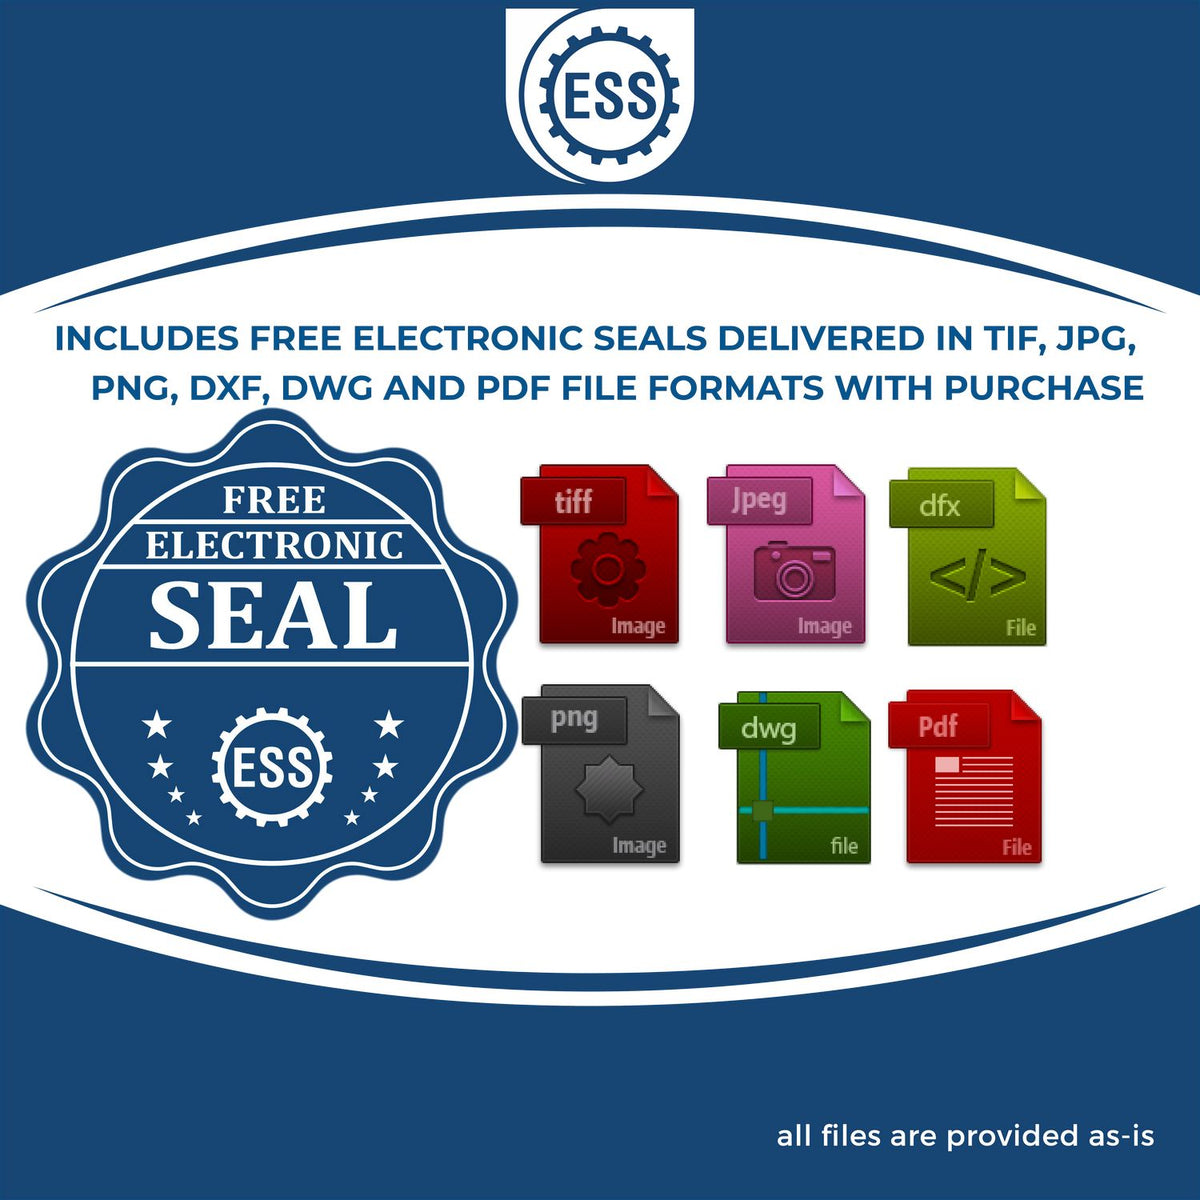 An infographic for the free electronic seal for the Maine Professional Geologist Seal Stamp illustrating the different file type icons such as DXF, DWG, TIF, JPG and PNG.